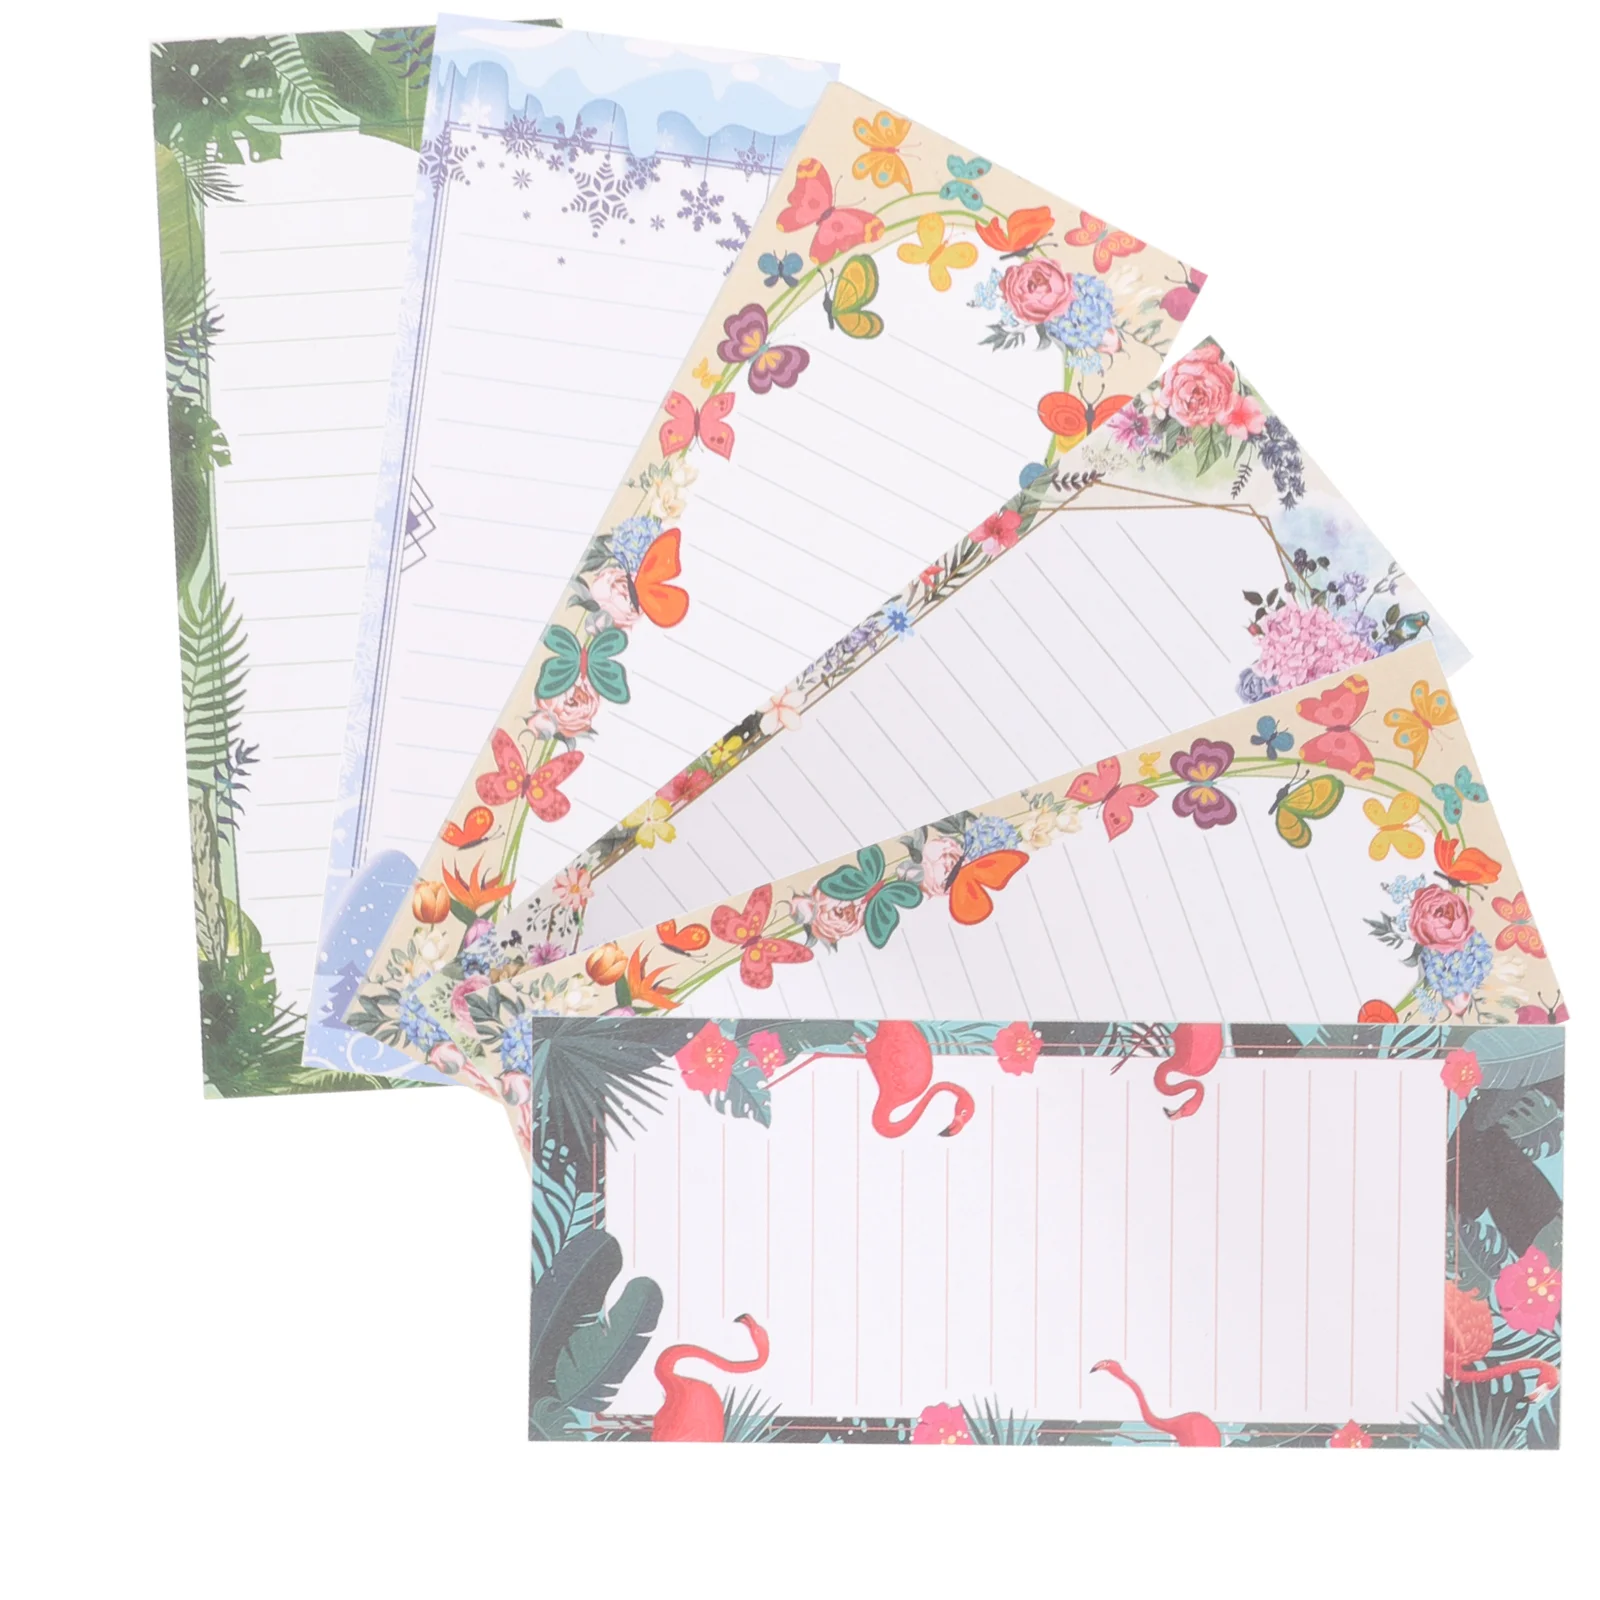 6pcs Magnetic Notepads Grocery List Shopping List Notepads with Magnet Fridge Memo Notepads grocery list magnetic pad fridge sticker shopping notepads tear off paper magnet pad to do list for refrigerator notice board